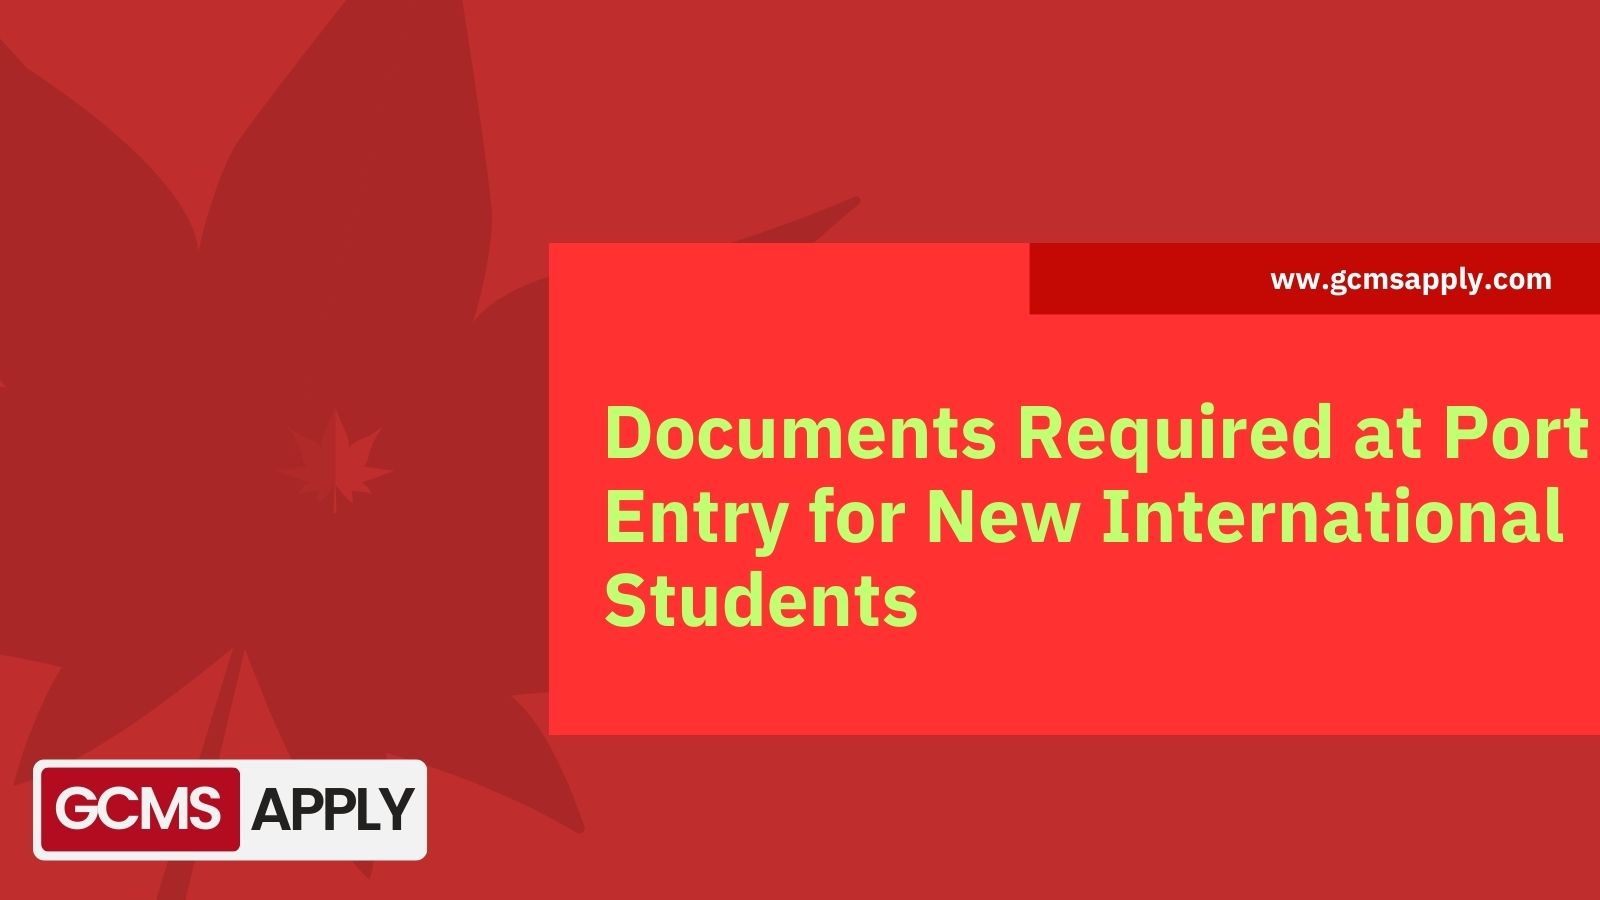 Documents Required at Port of Entry for New International Students